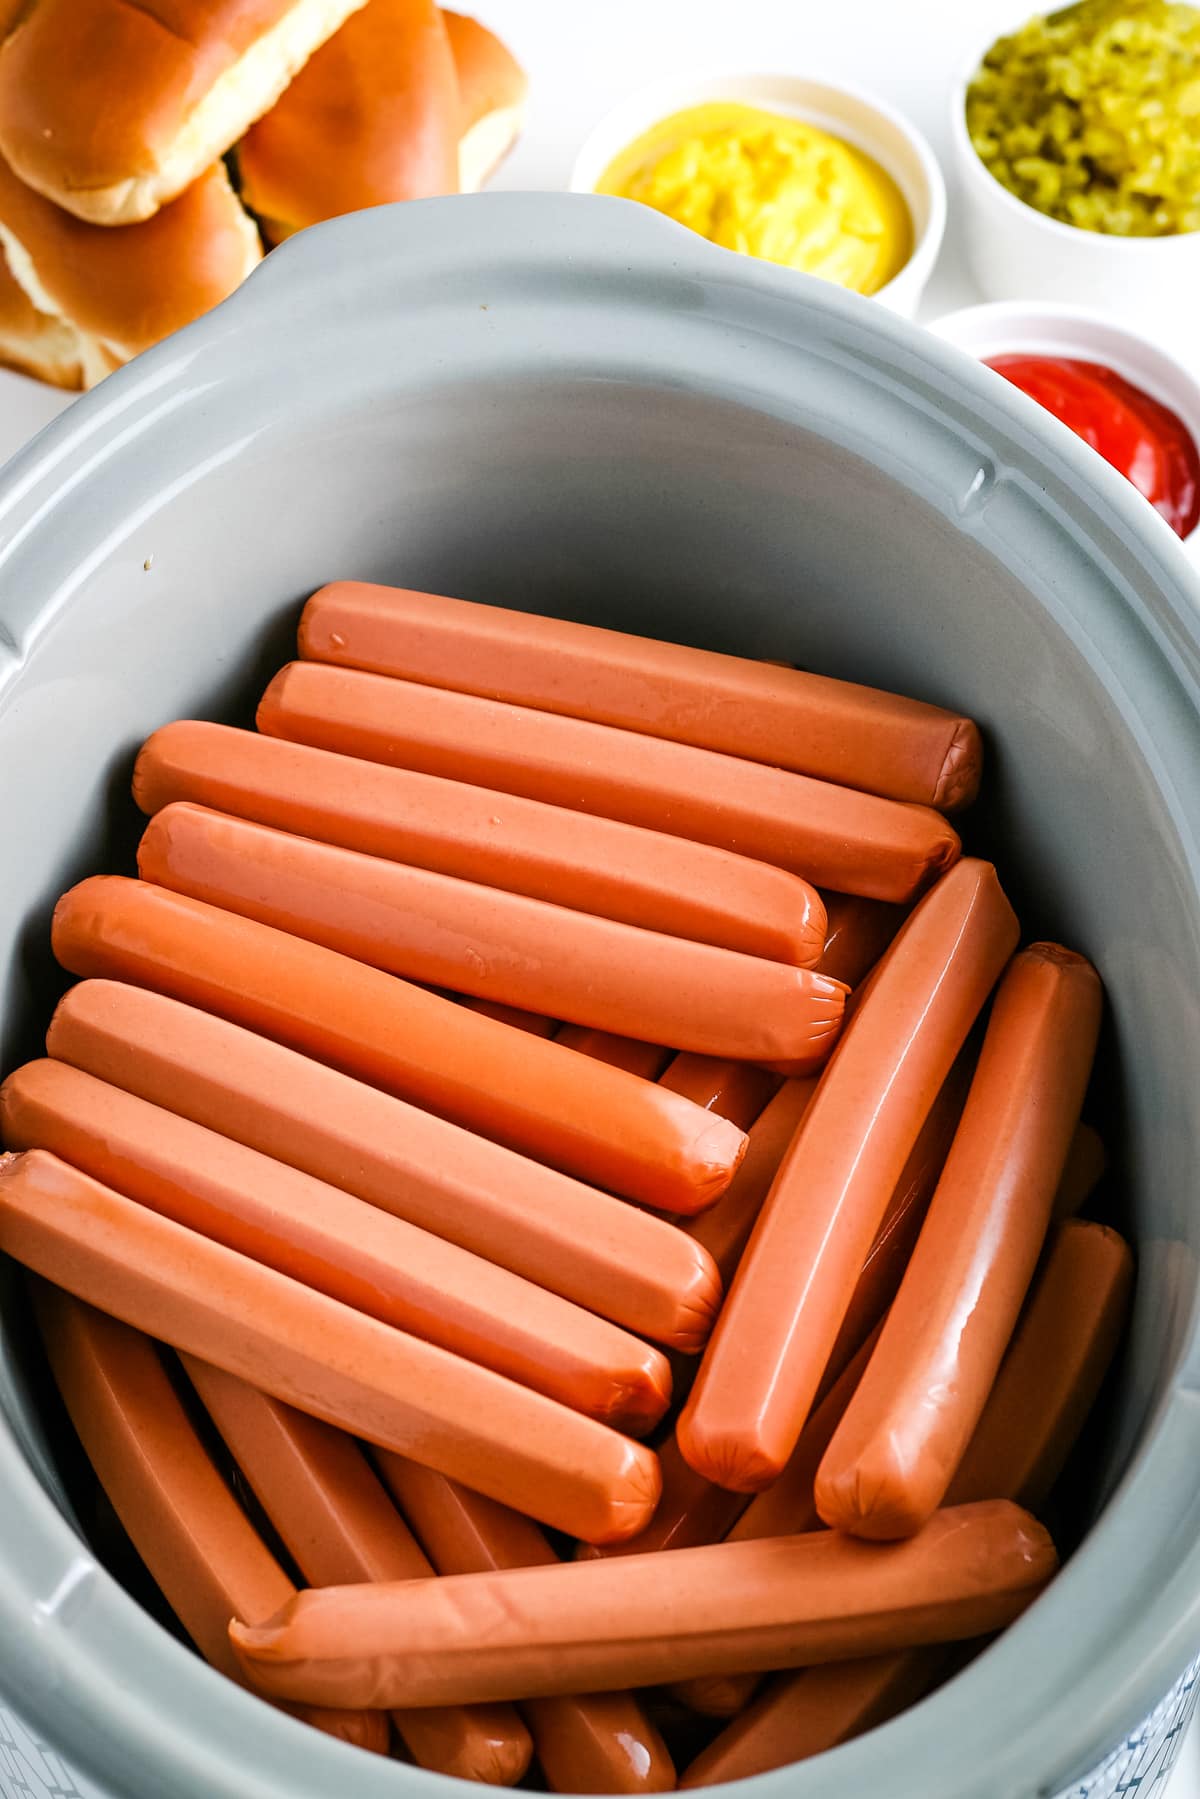 How to Cook Hot Dogs in Crock Pot